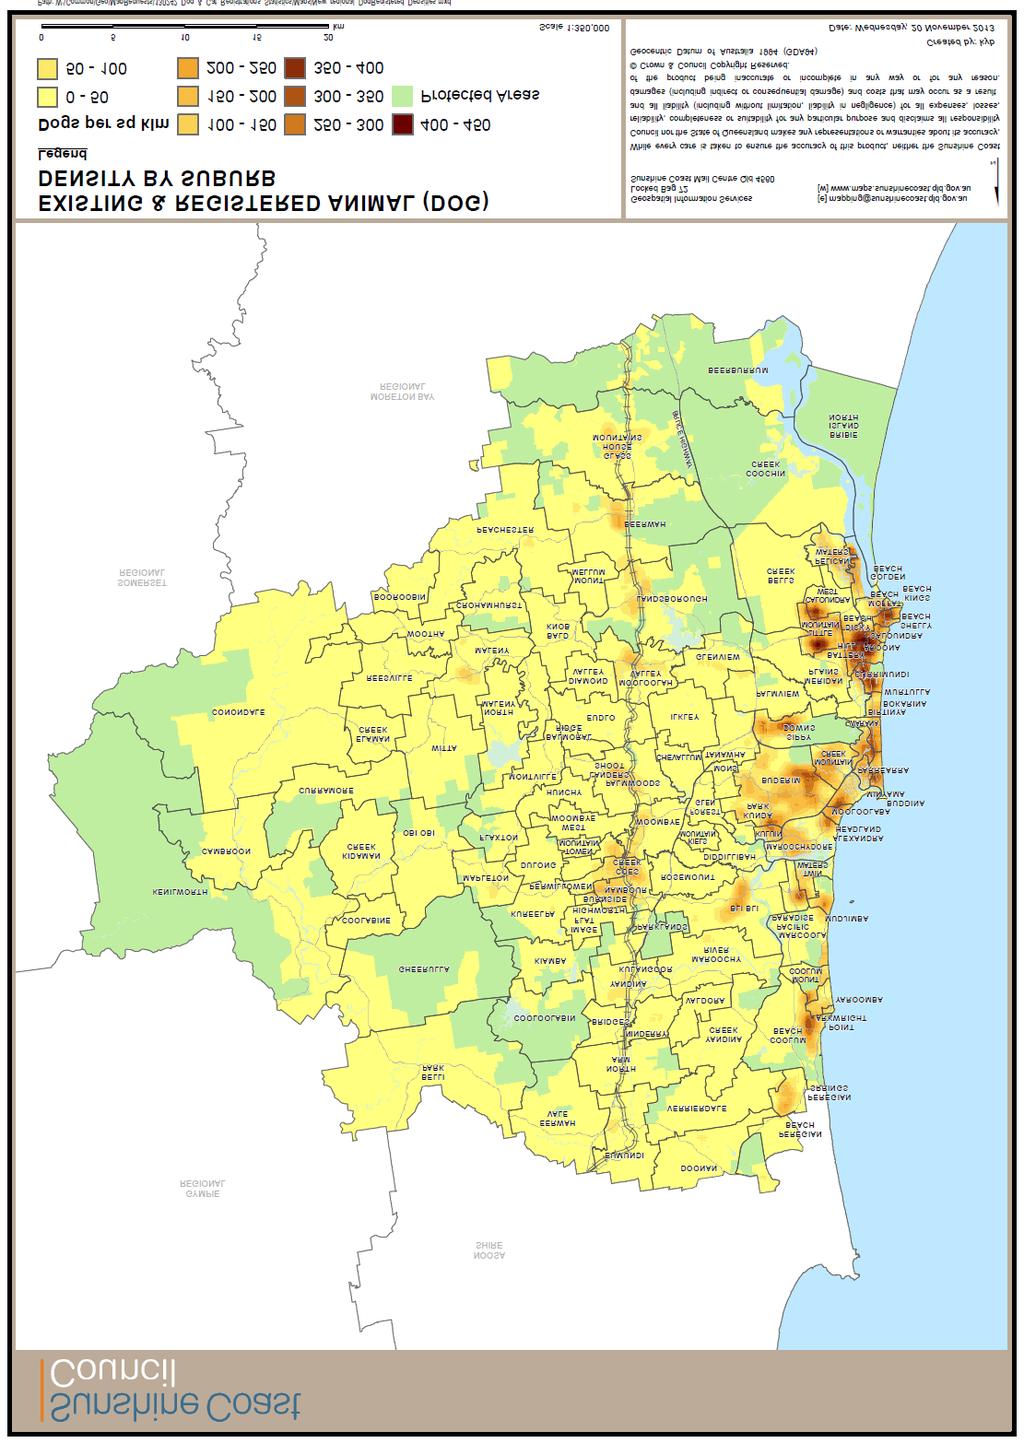 Appendix Two Density of registered dogs by suburb